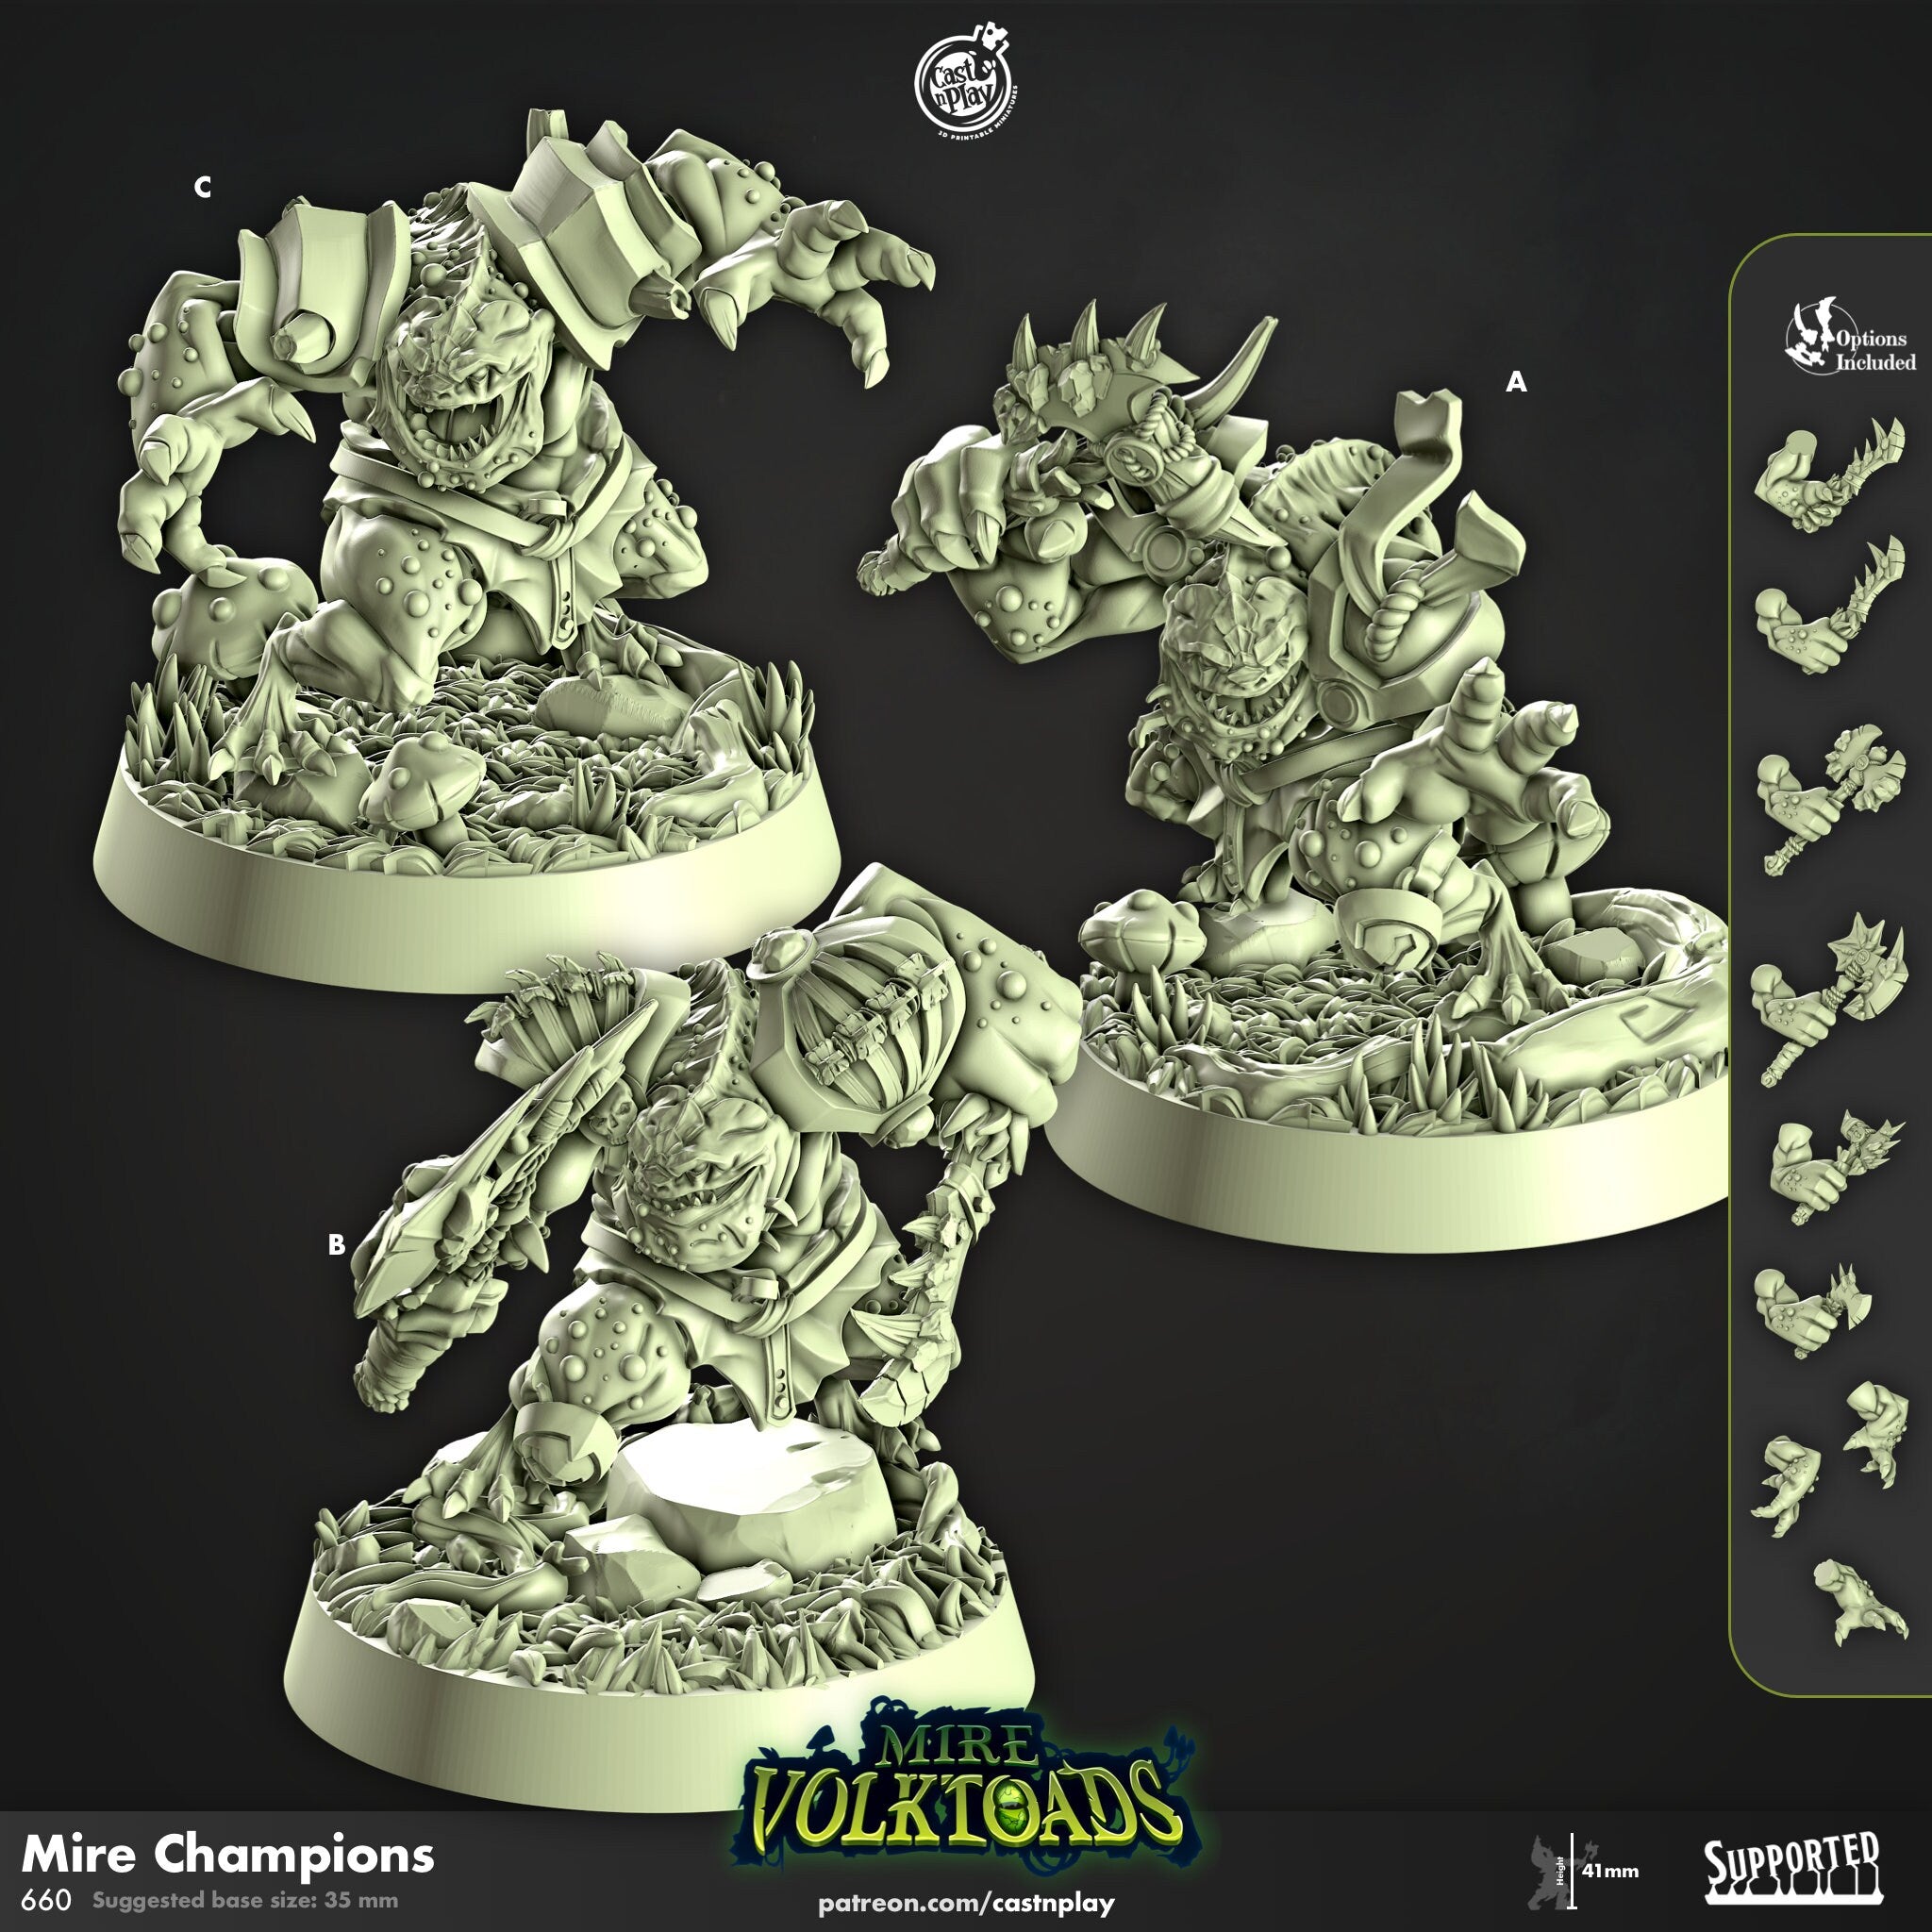 Mire Champions by Cast N Play (Mire volktoads)